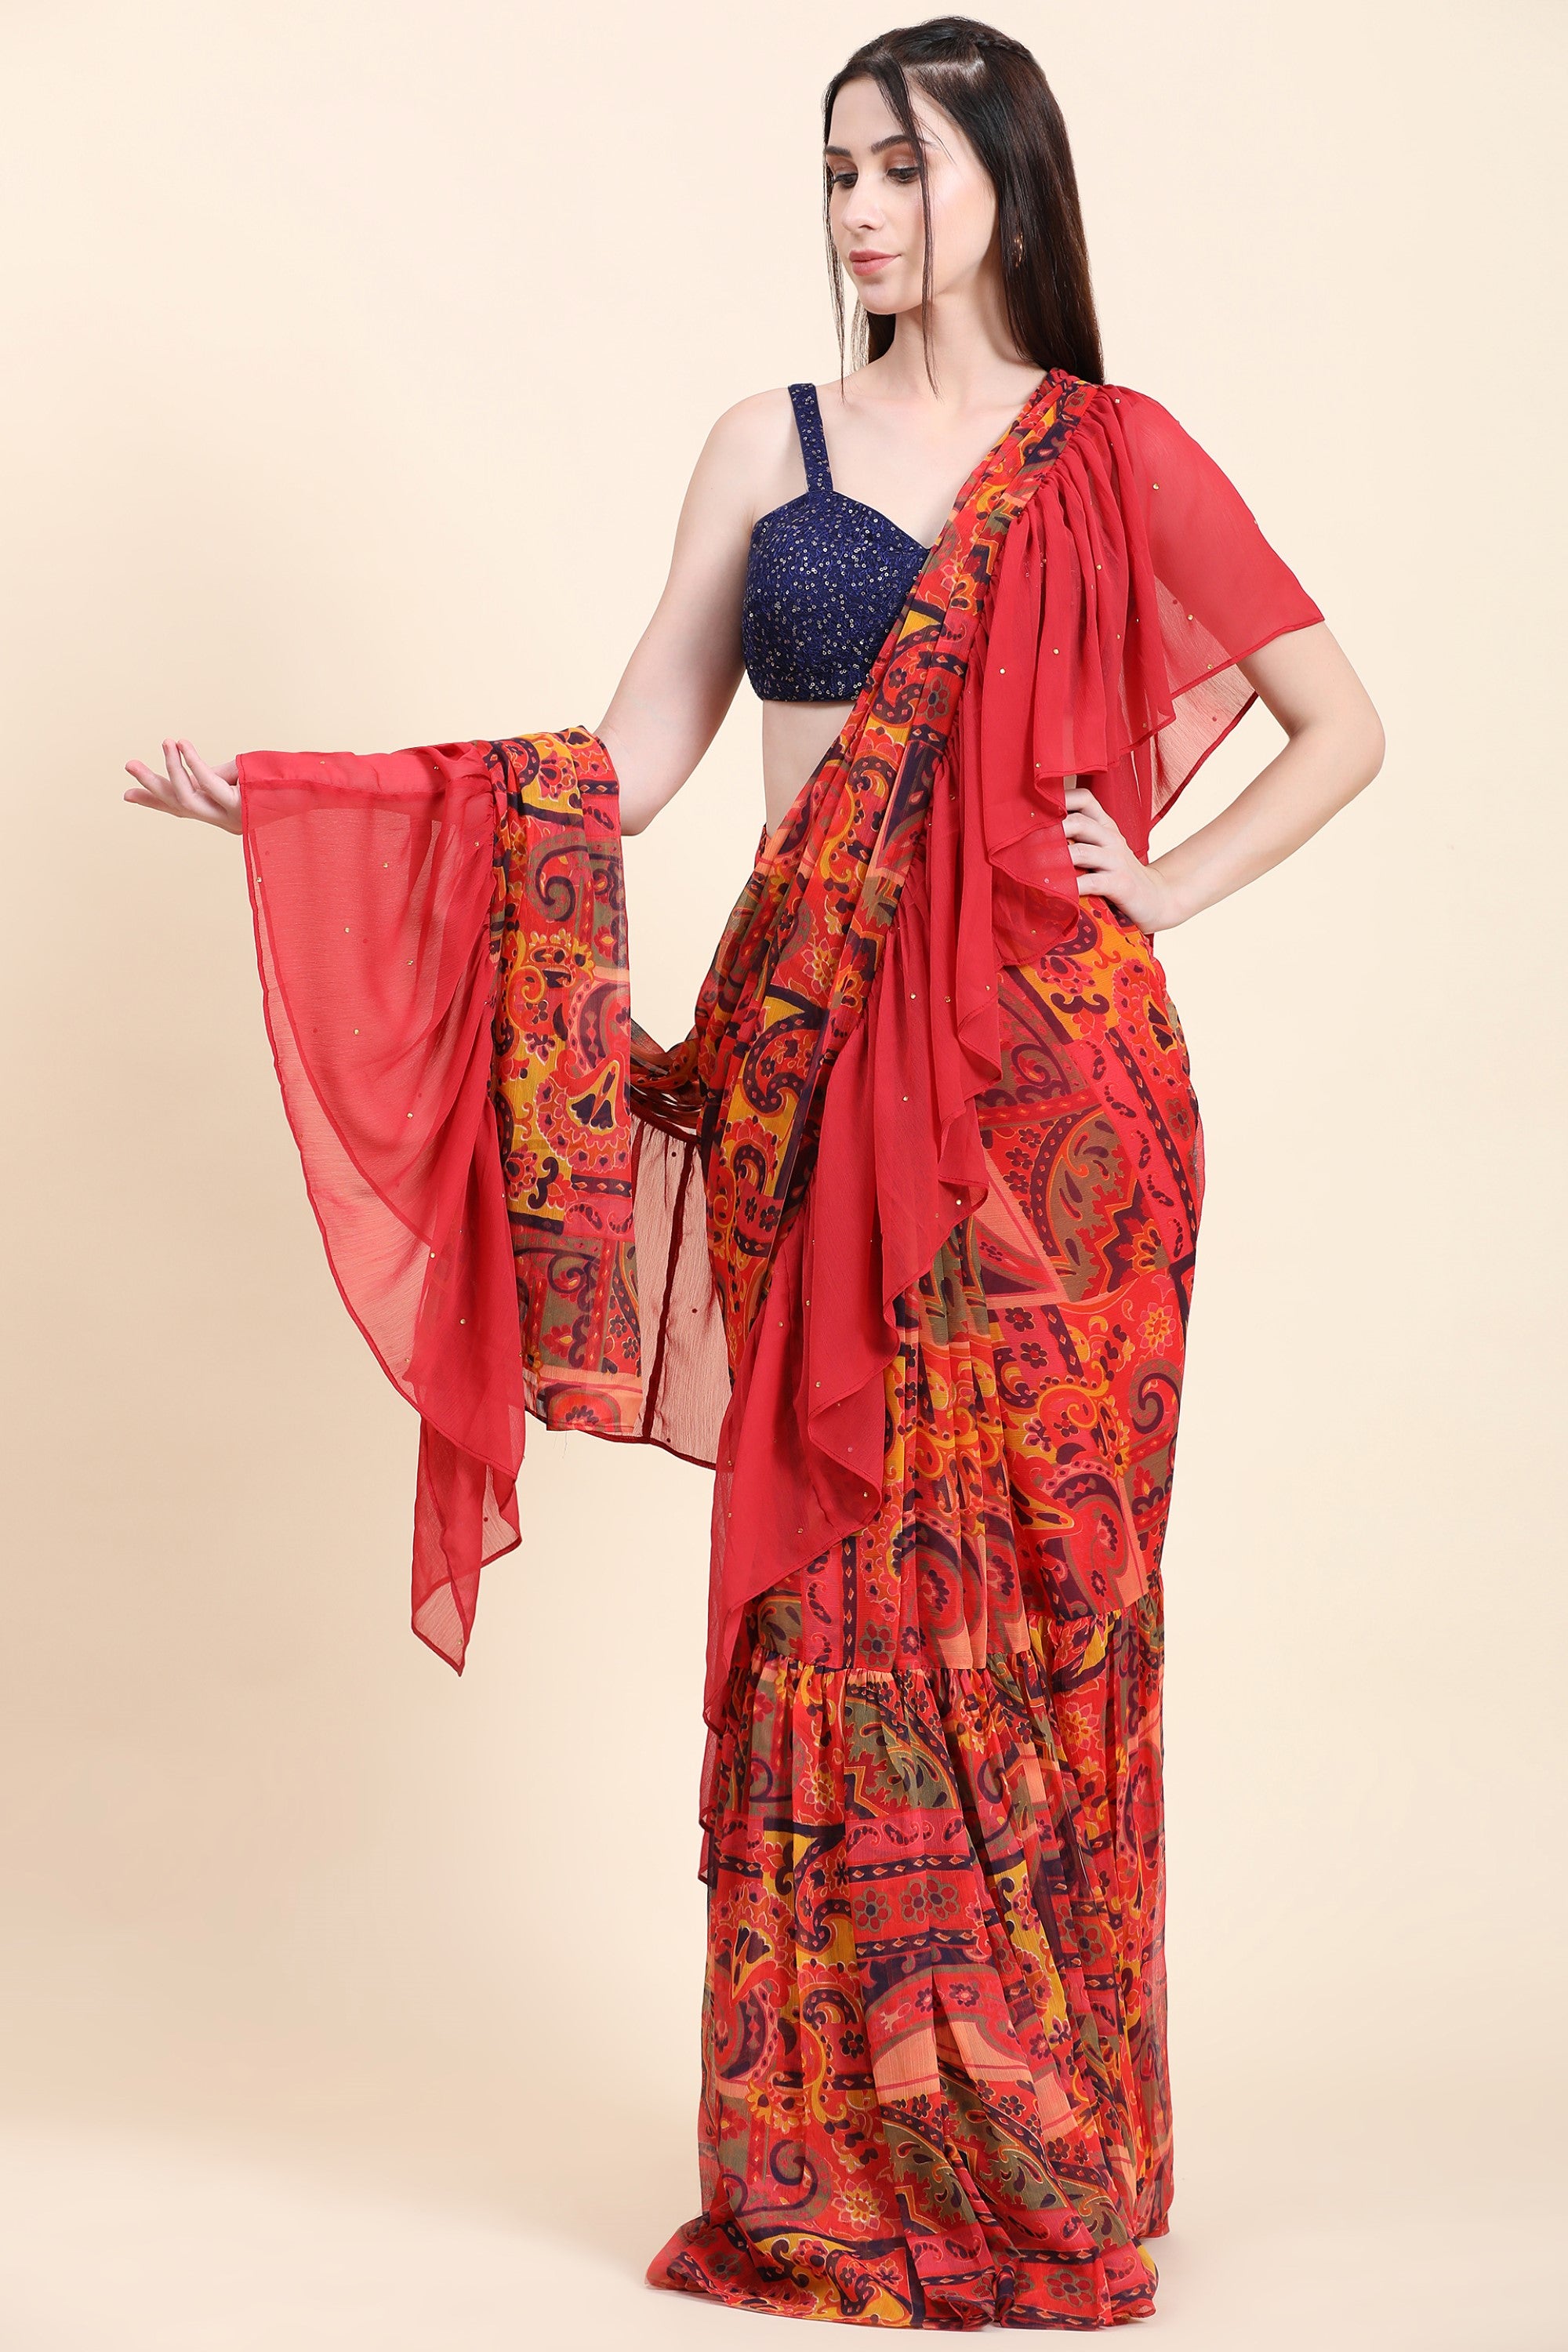 Women's Printed Chiffon Red base Ruffle Saree, Sequins Blouse set - MIRACOLOS by Ruchi